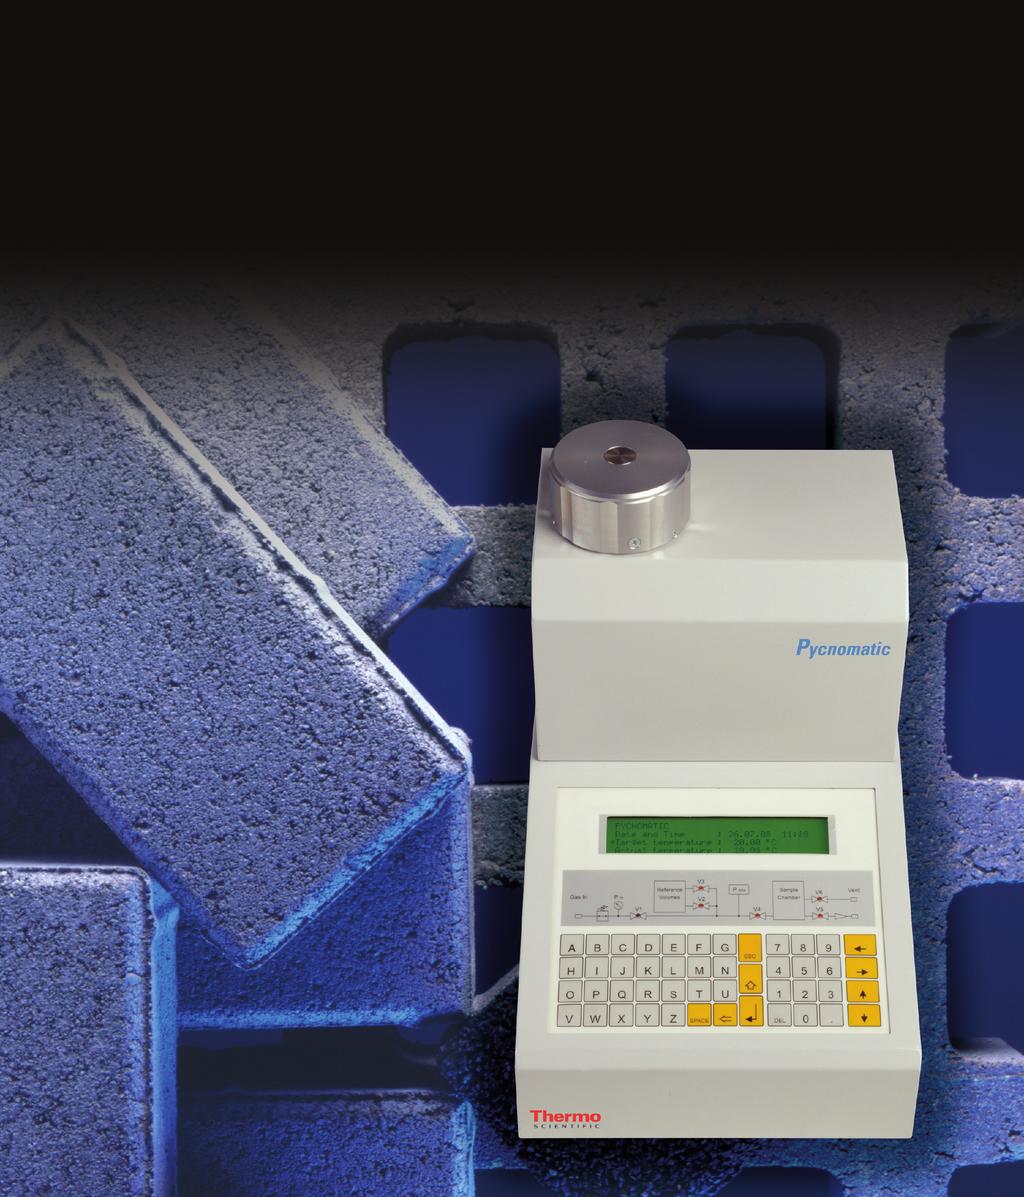 Pycnomatic ATC For solids and powders real density determination Pycnomatic ATC Automatic Temperature Control The Thermo Scientific Pycnomatic is the ultimate development for density measurement of